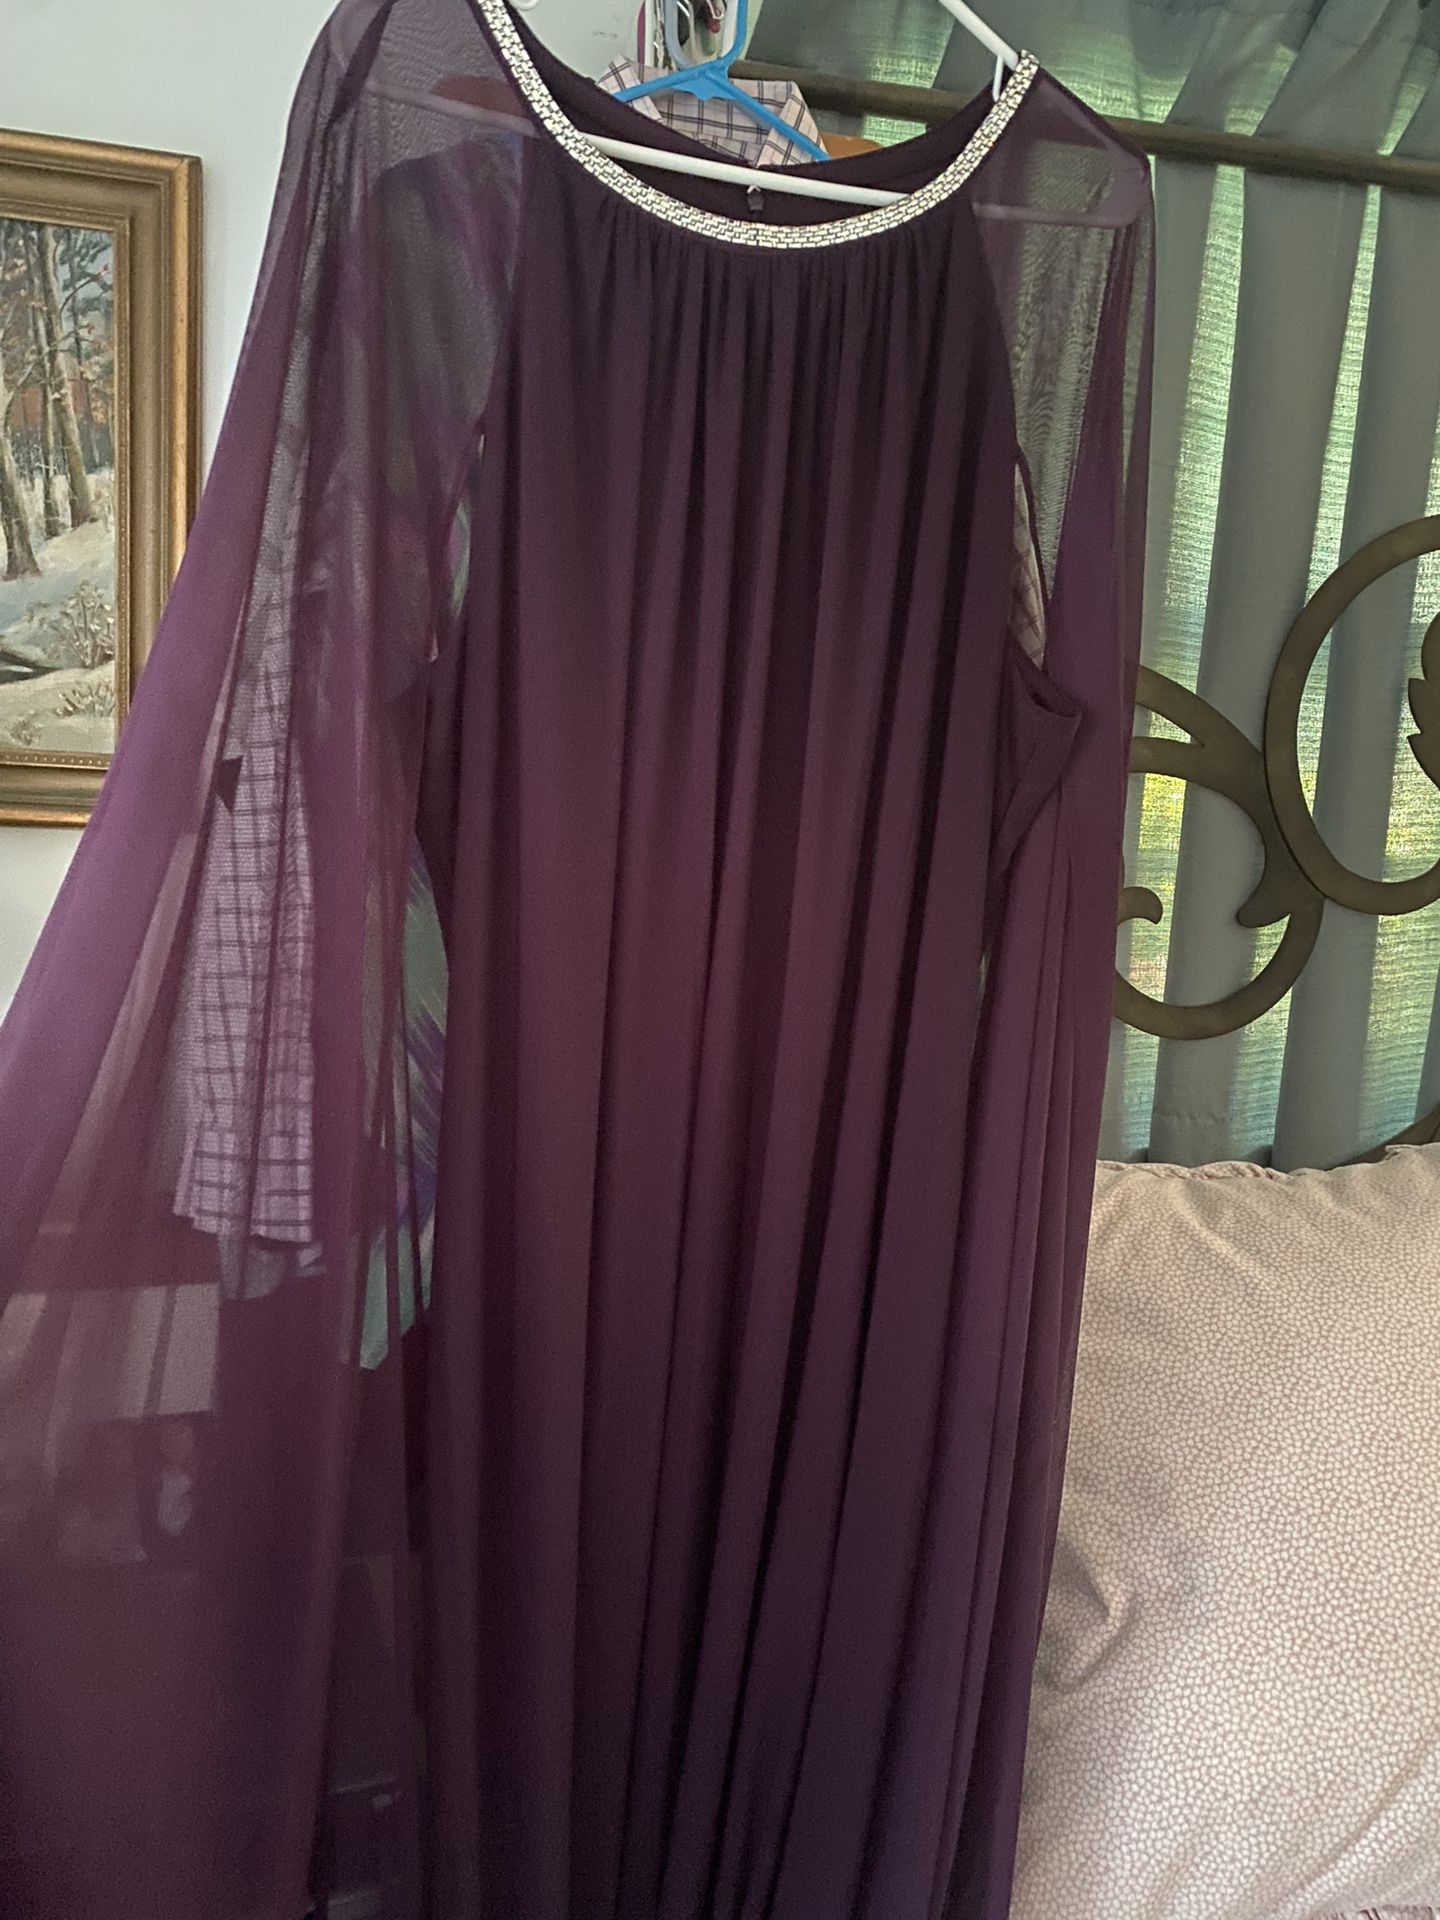 Size 20 Full Length Gown With Rhinestone Neckline And Sheer Shawl Like Sleeves